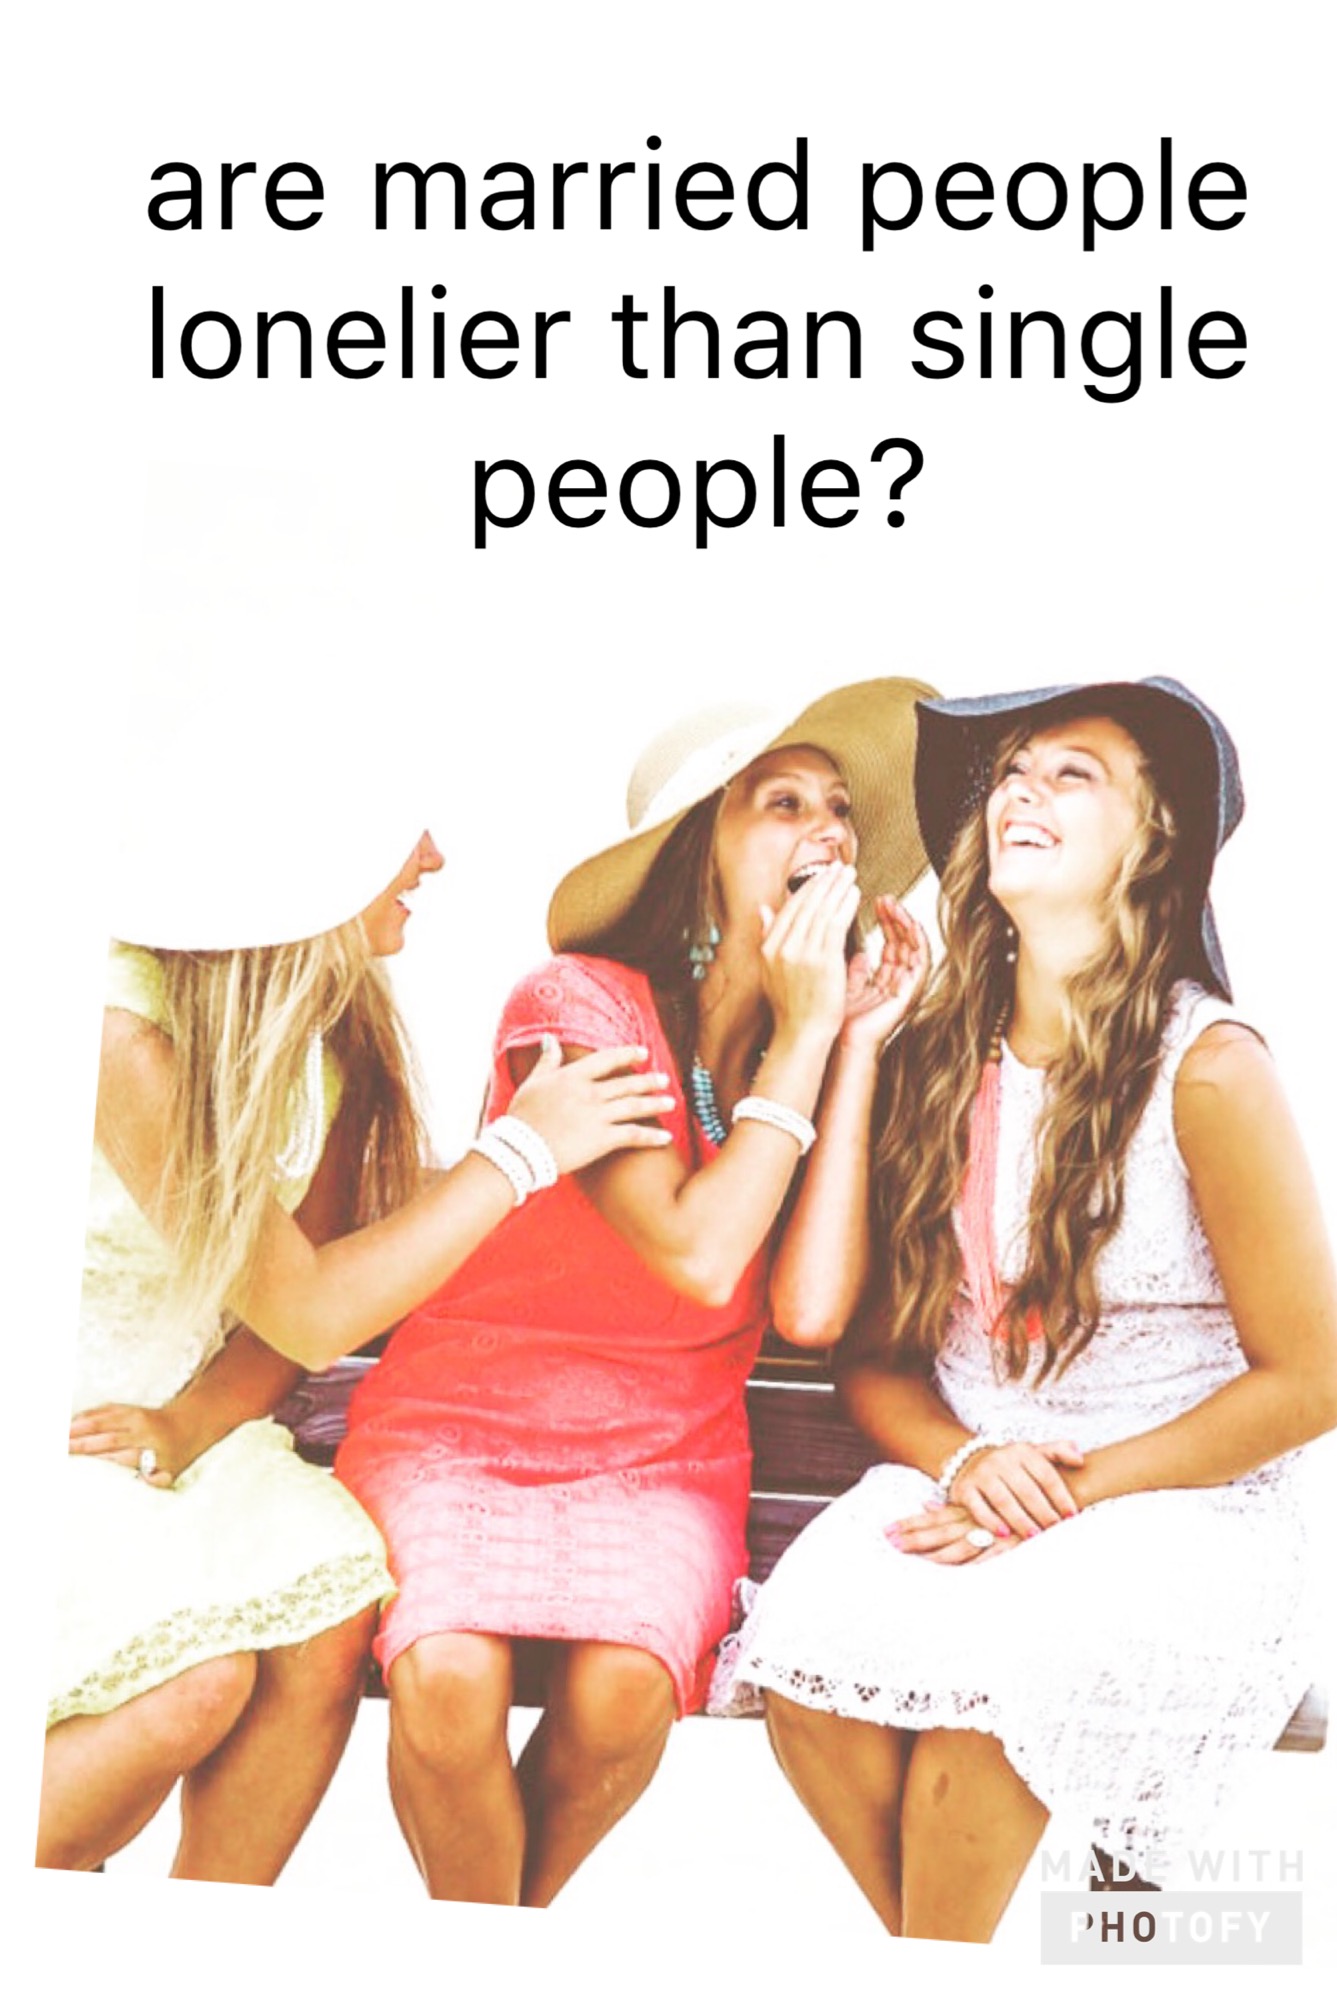 Are married people lonelier than single people